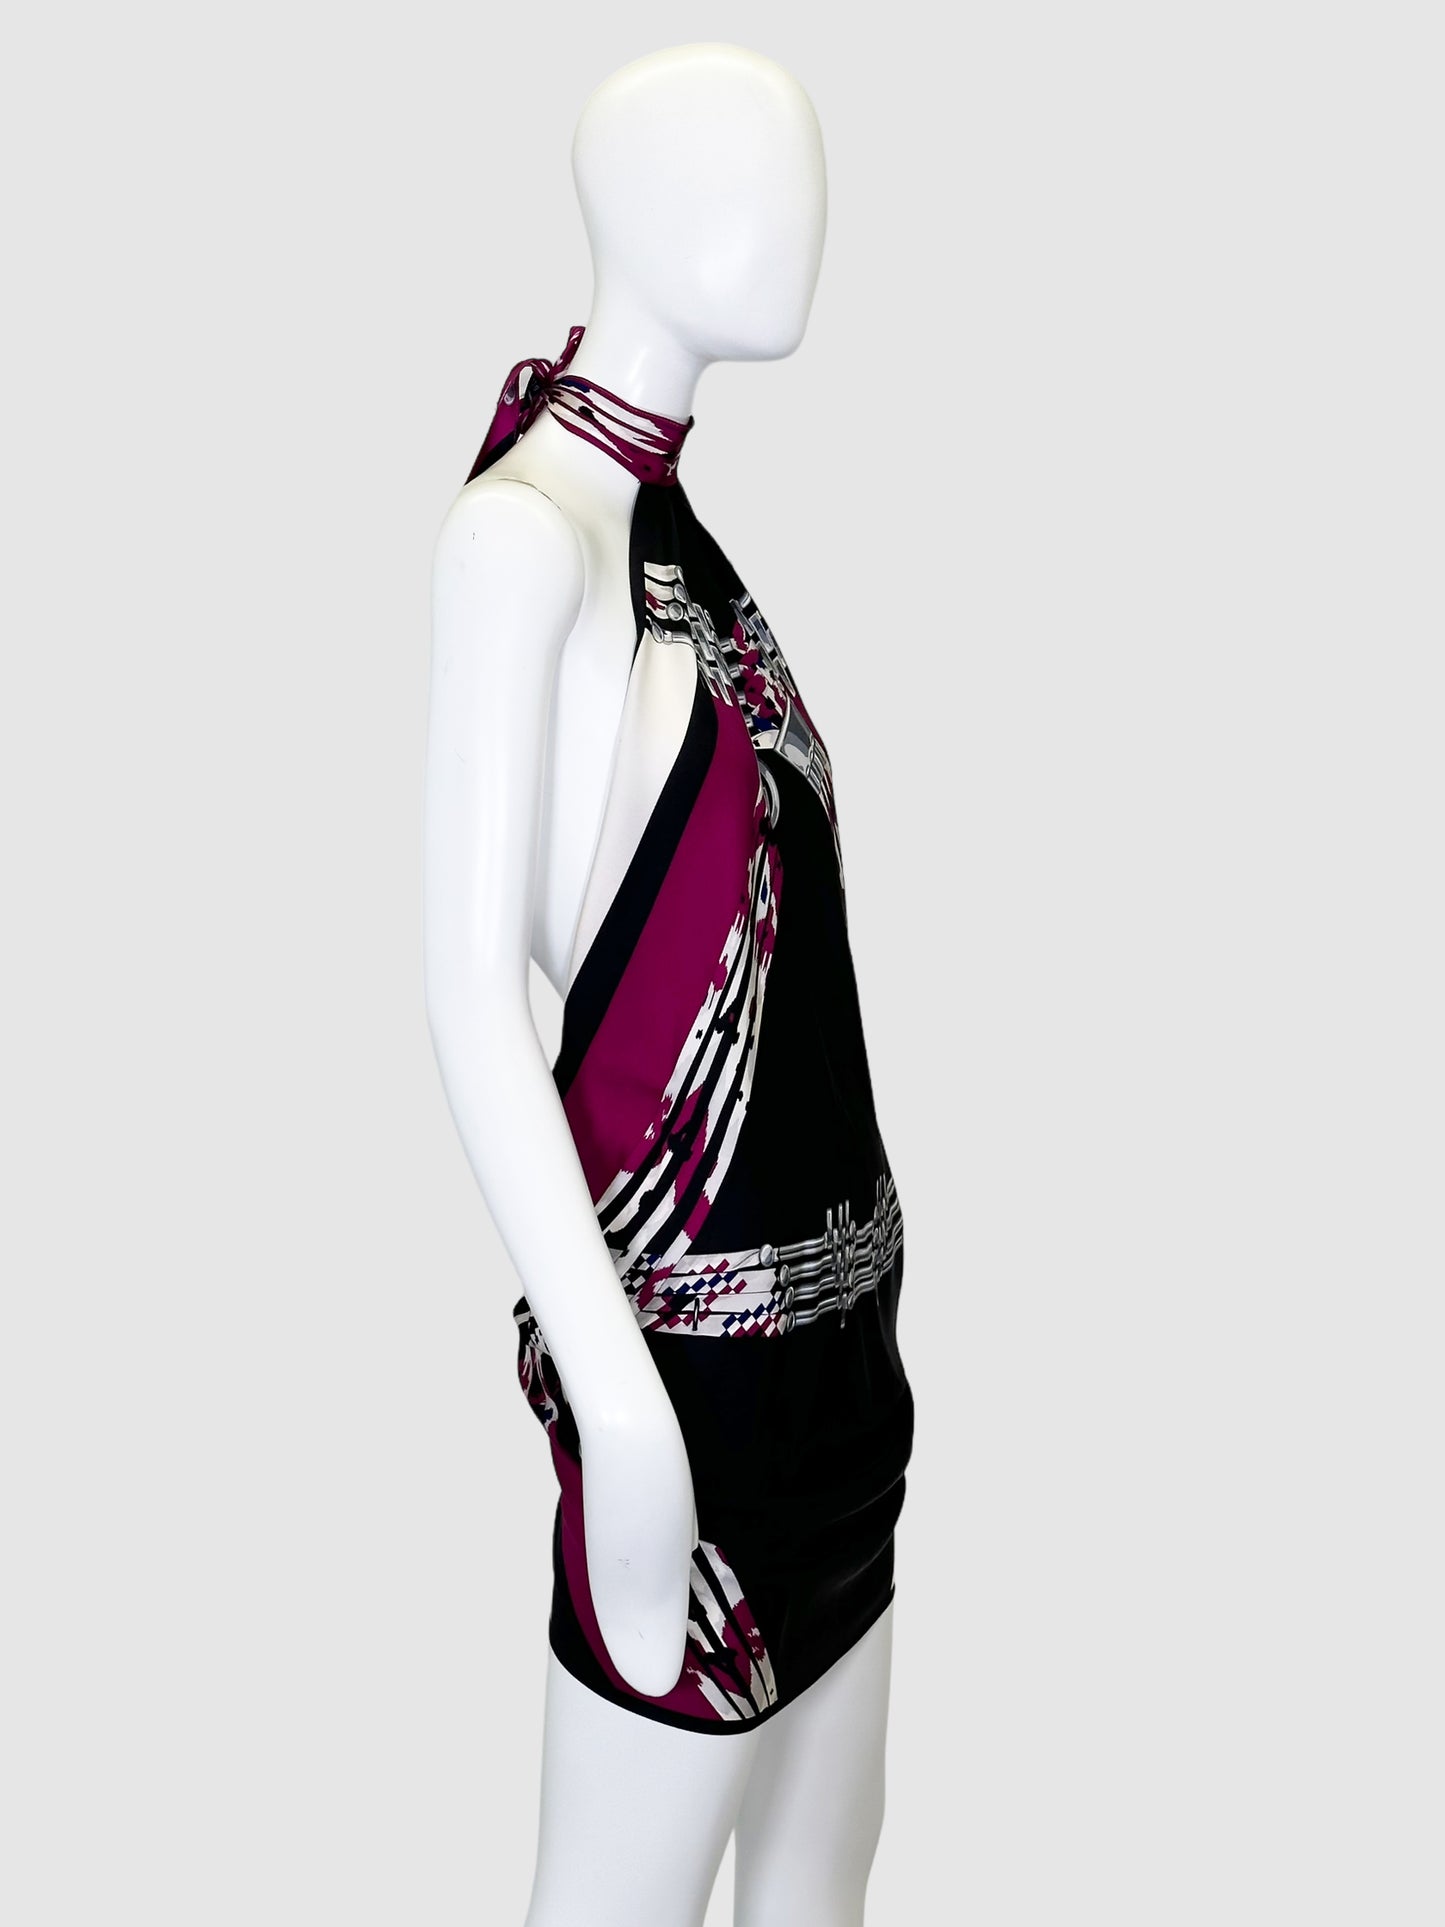 Printed Scarf Halter Neck Dress - One Size